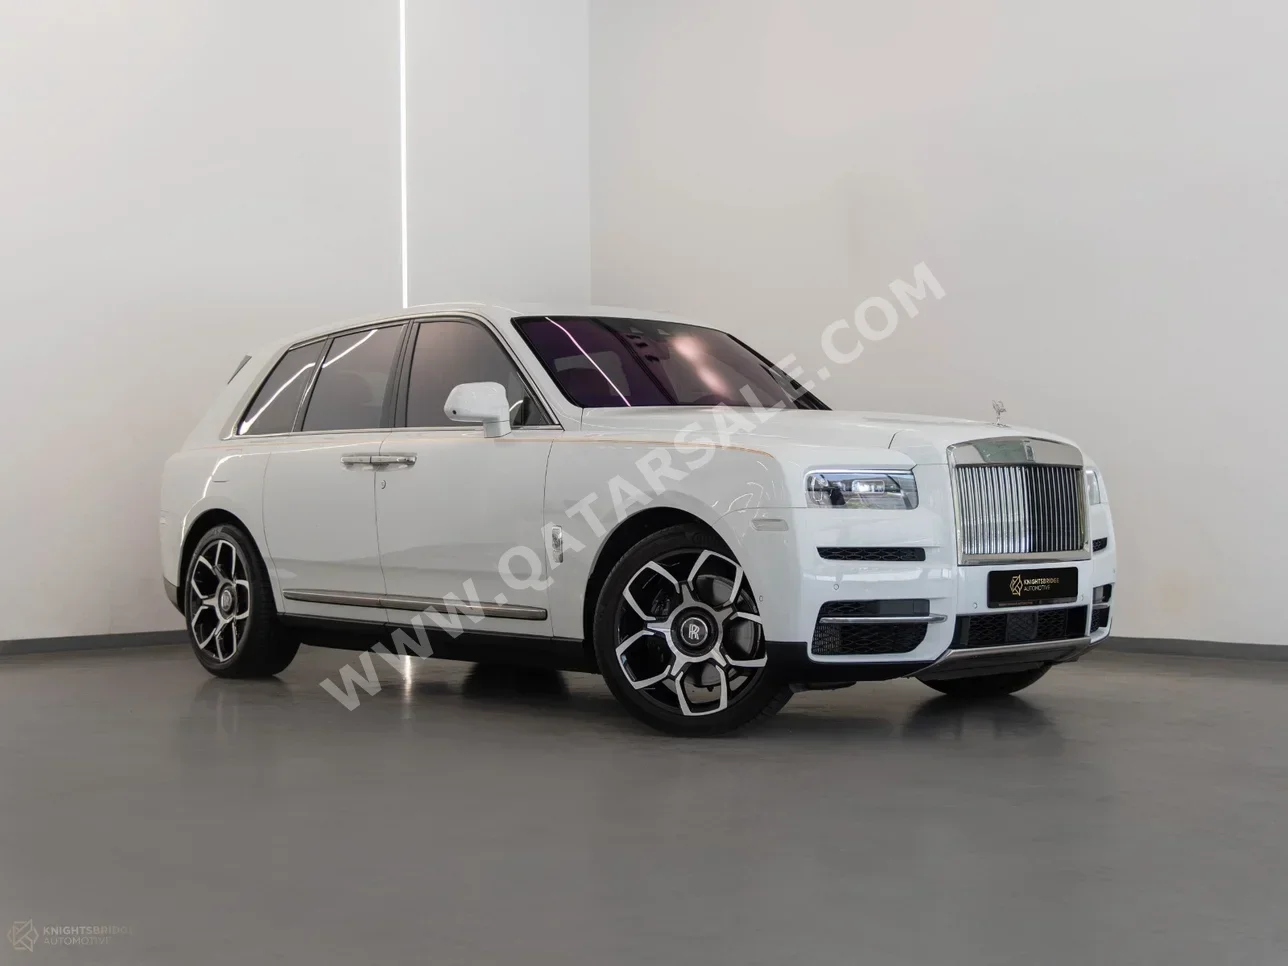  Rolls-Royce  Cullinan  2023  Automatic  7,950 Km  12 Cylinder  Four Wheel Drive (4WD)  SUV  White  With Warranty